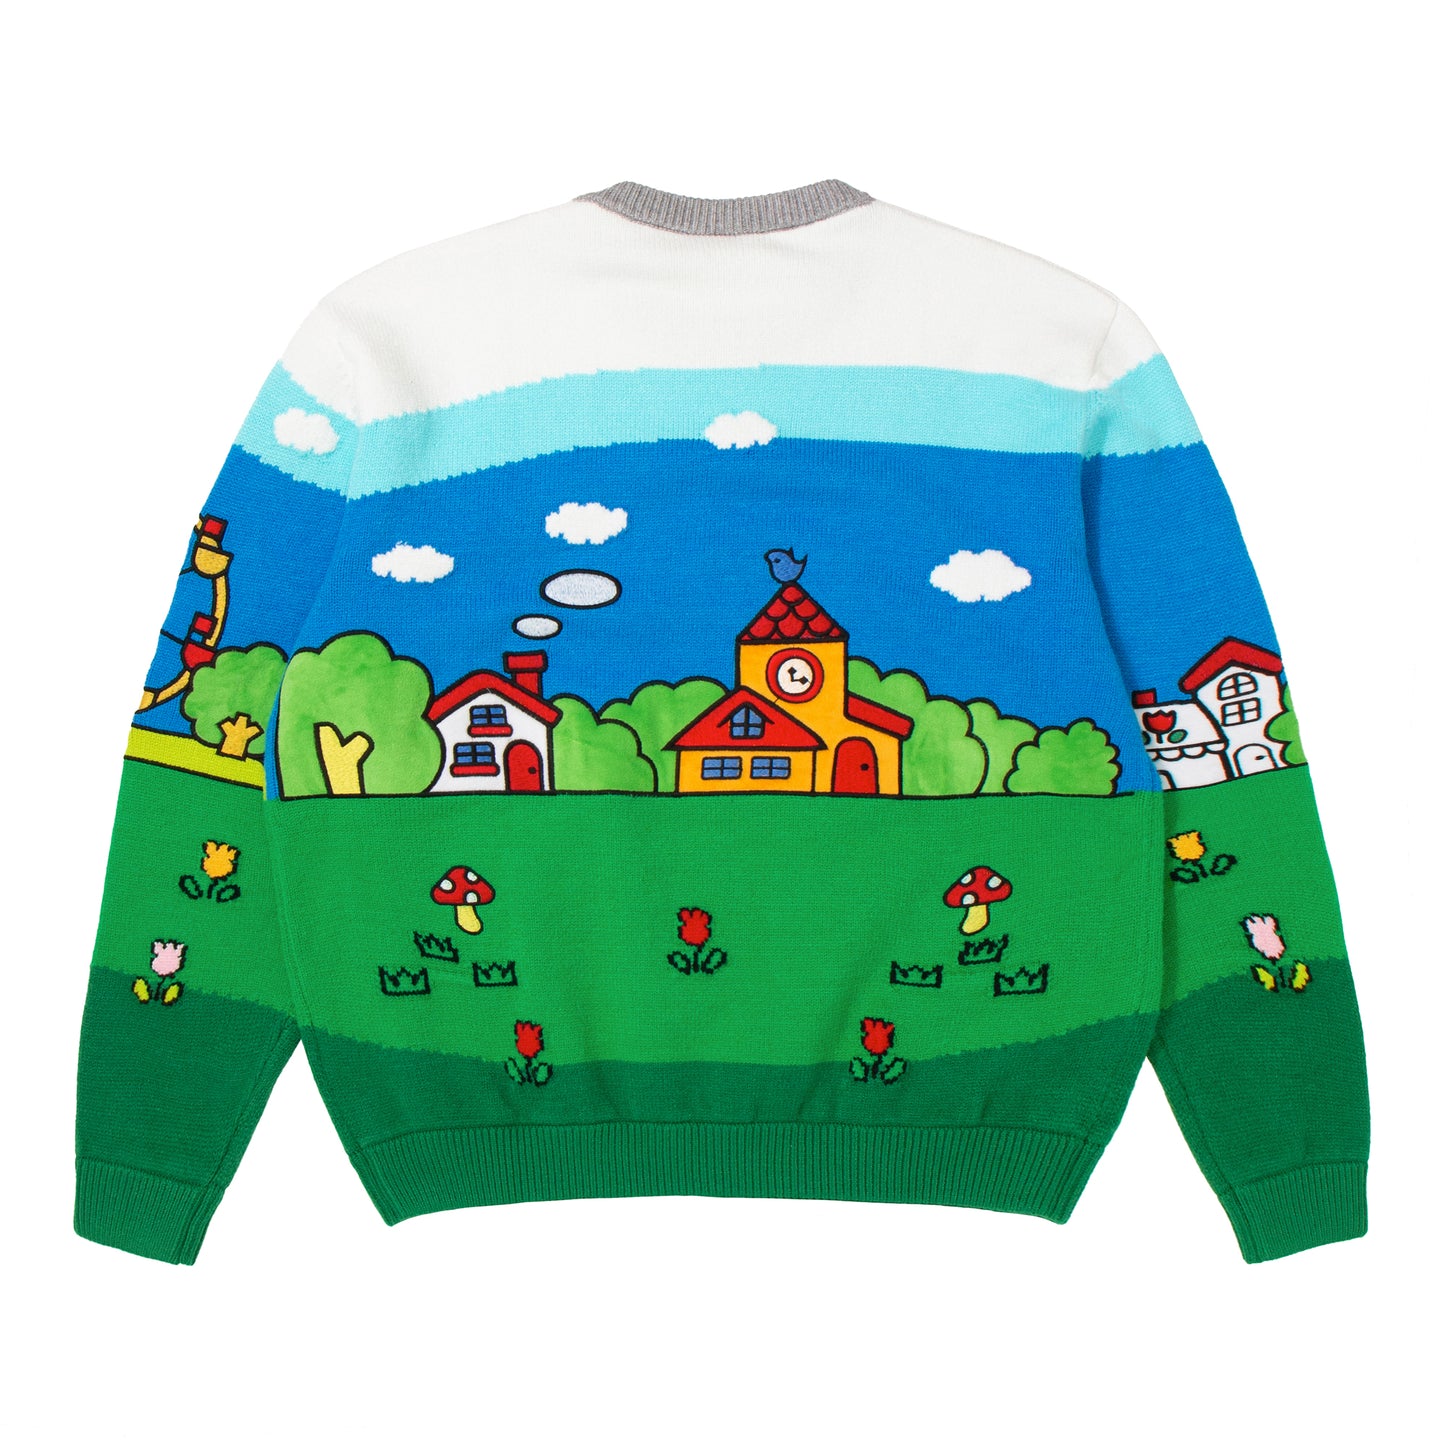 HELLO KITTY CARNIVAL KNIT SWEATER (DAY TIME)